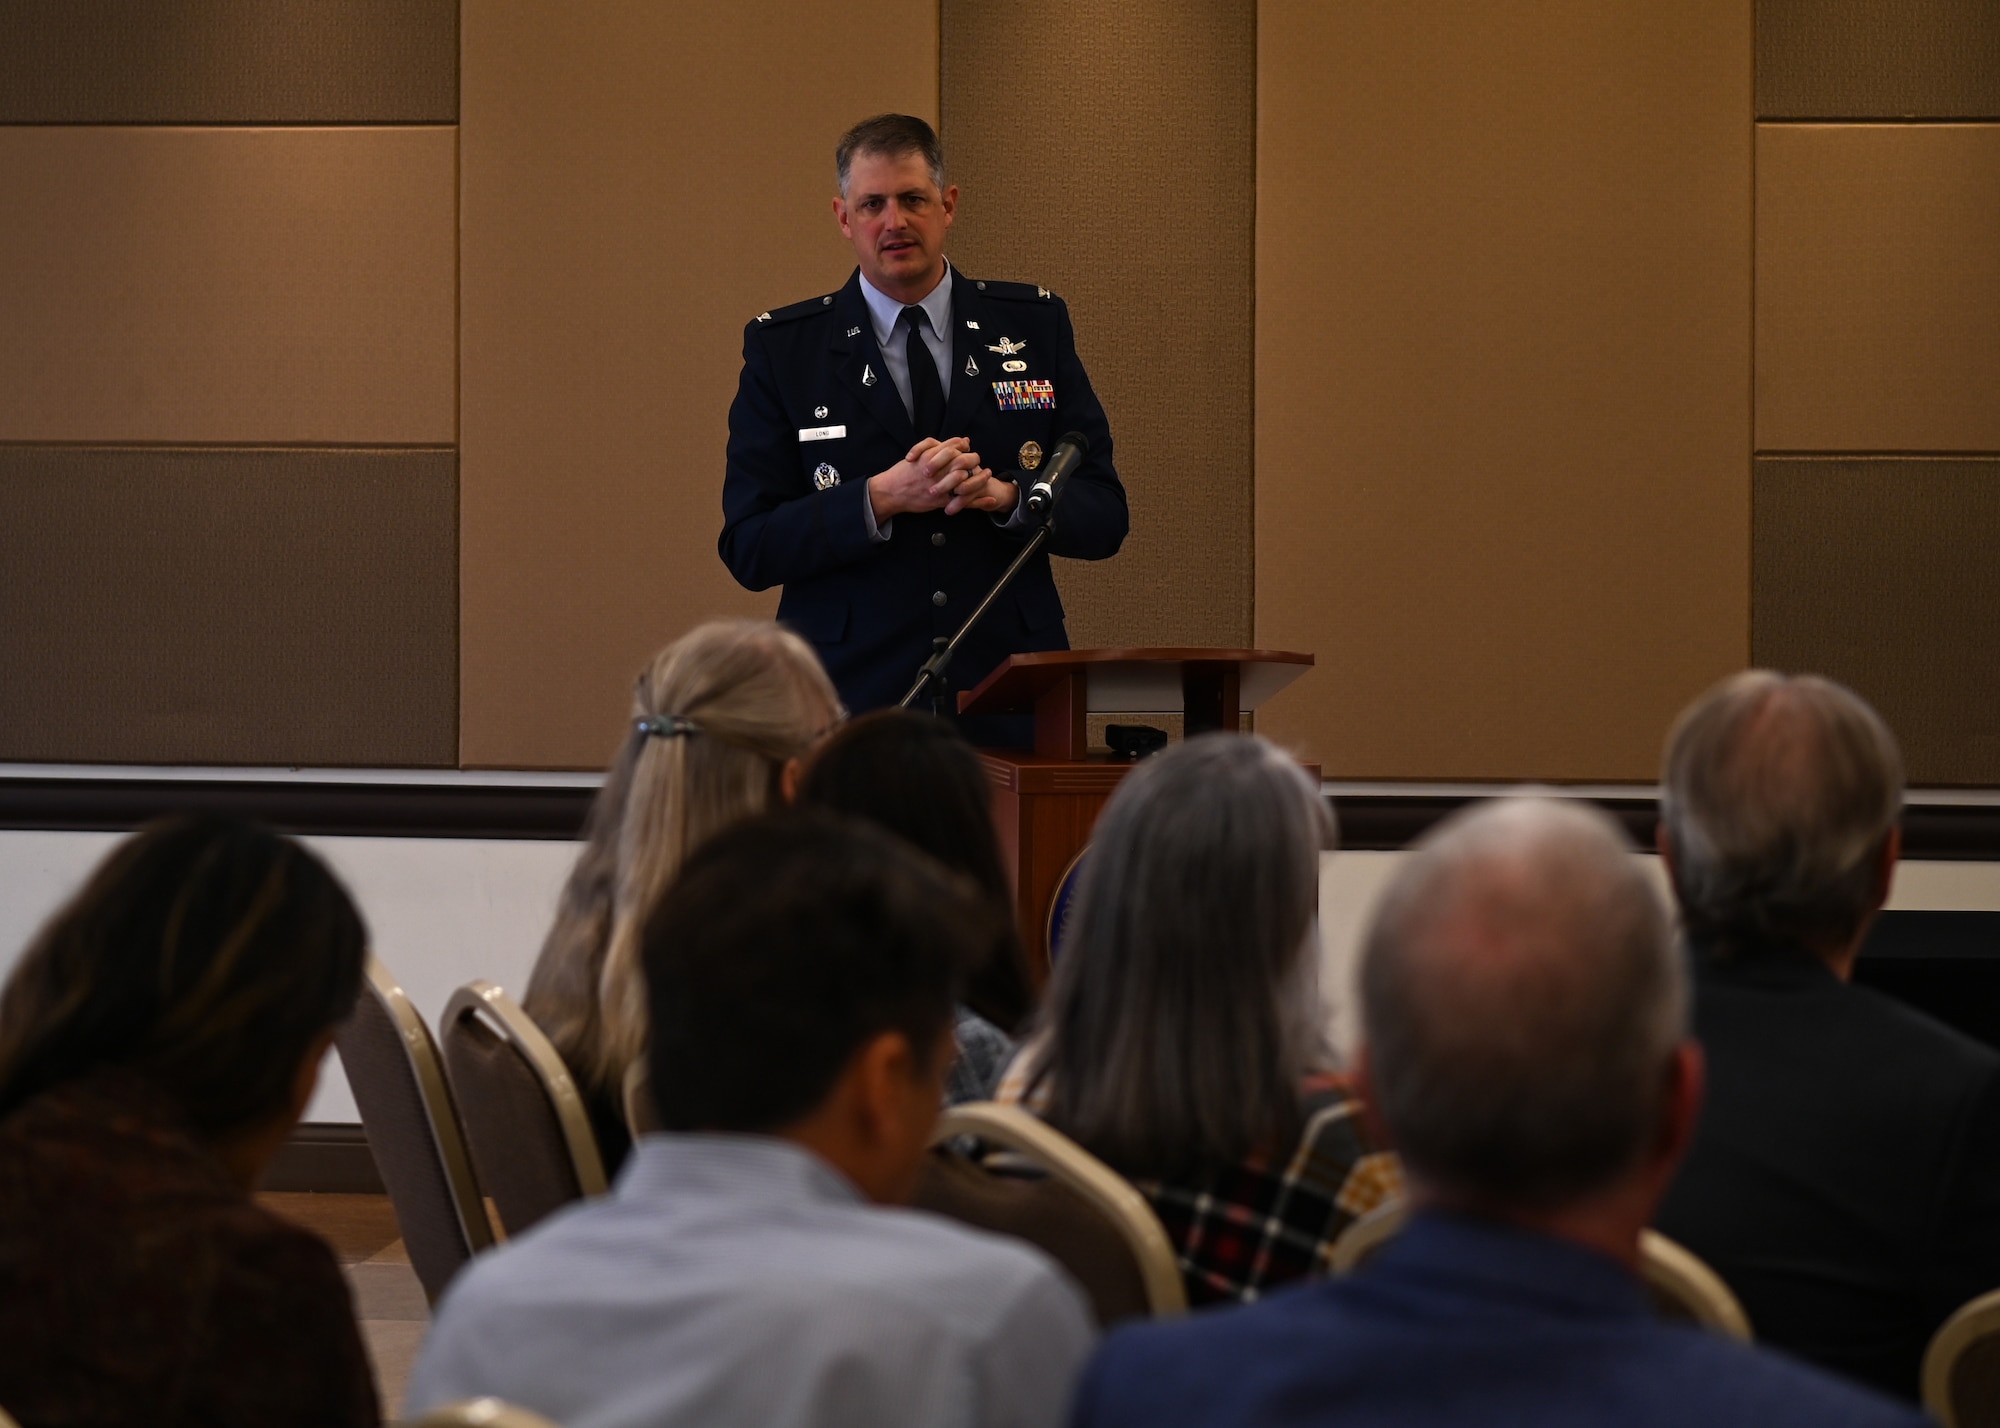 Col. Rob Long, Space Launch Delta 30 commander, participated in a housing forum hosted by Congressman Salud Carbajal in Lompoc, Calif., Feb. 15, 2023. The colonel represented the 2,600 service members and 1,500 civilian personnel who live and work at Vandenberg Space Force Base. One of Long’s top priorities is improving housing availability and affordability for both service members and civilian workforces working with Vandenberg Space Force Base. (U.S. Space Force photo by Senior Airman Tiarra Sibley)